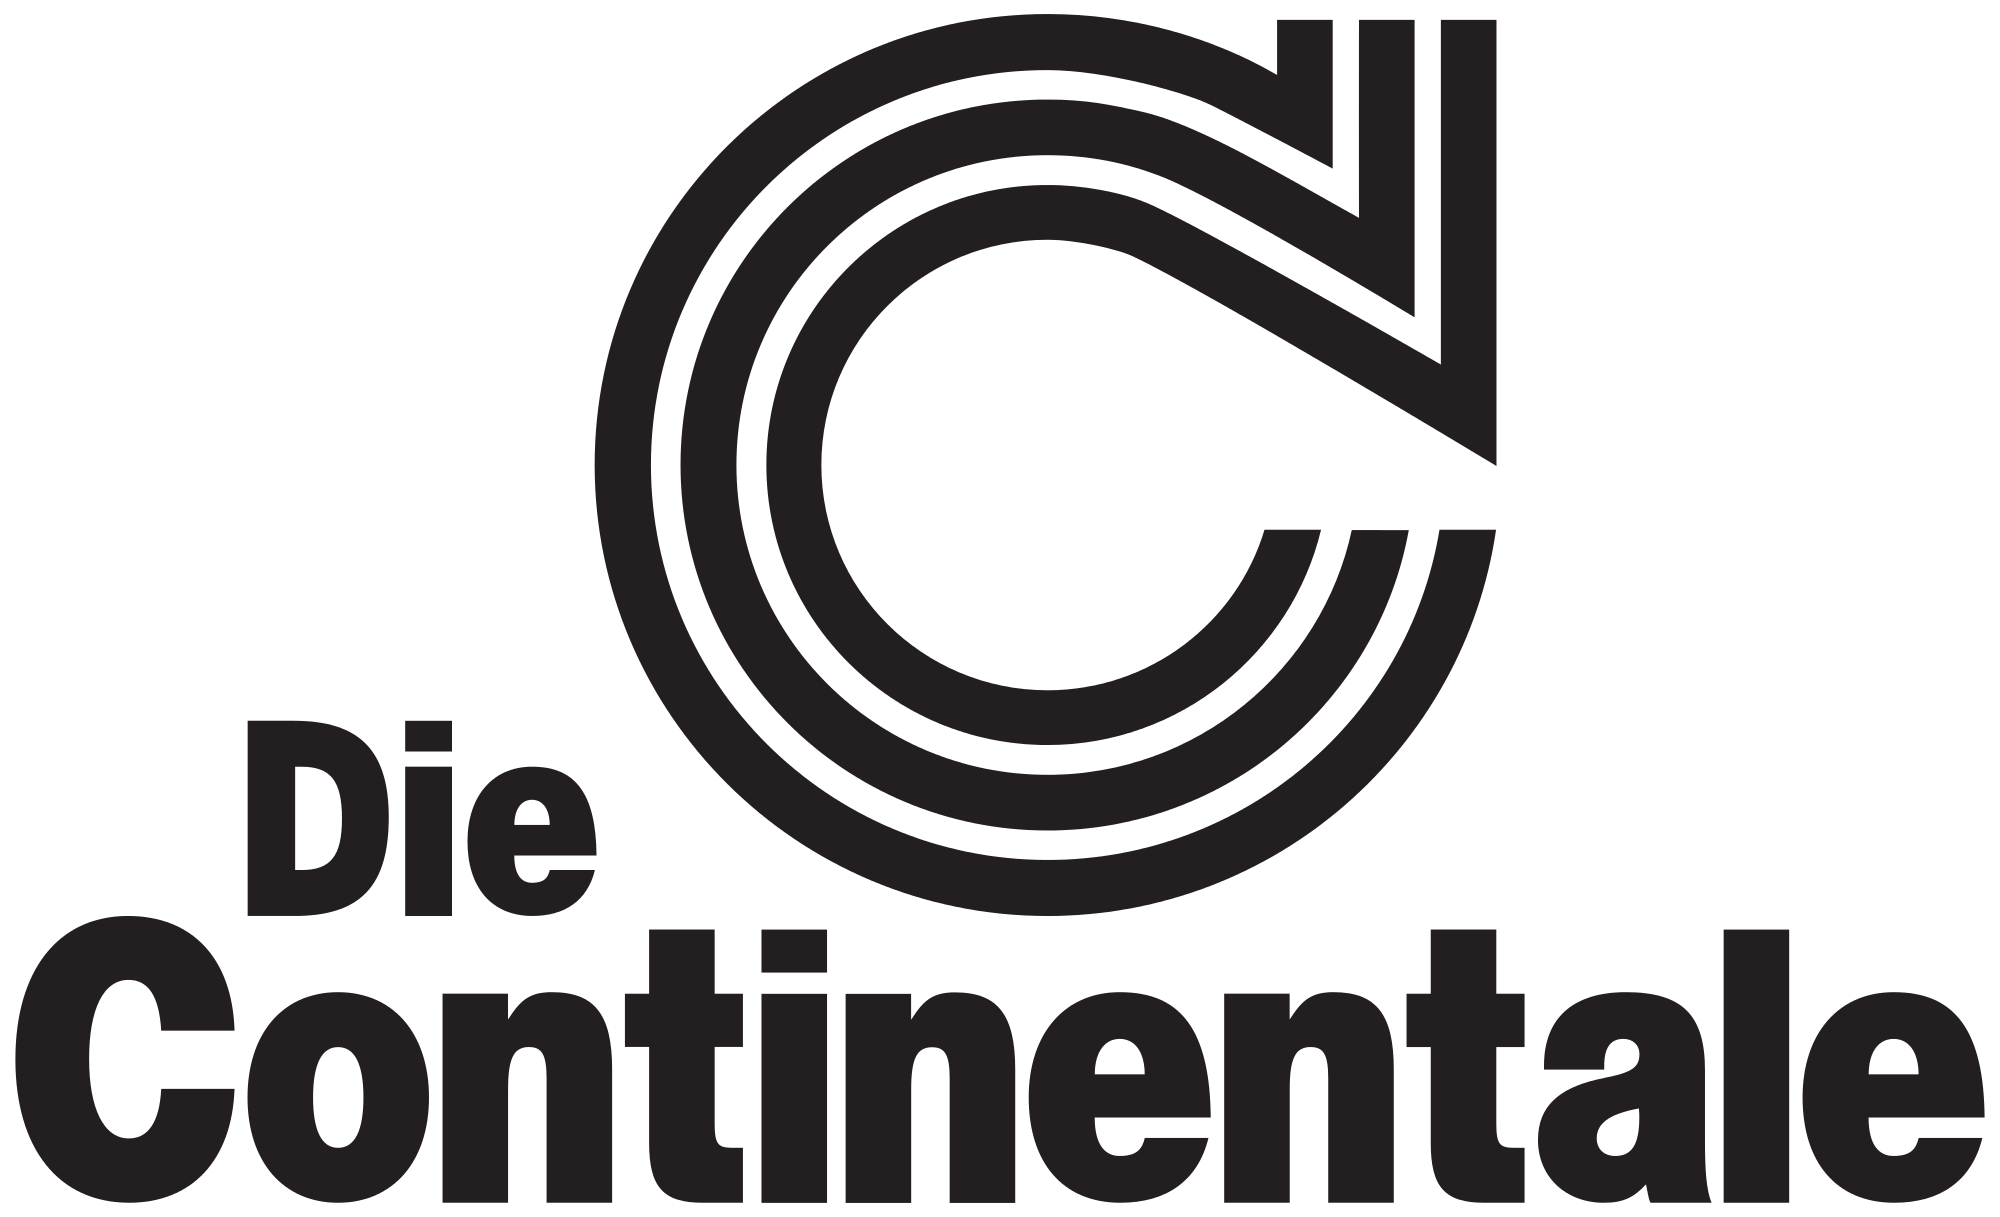 Continentale_logo.svg.png